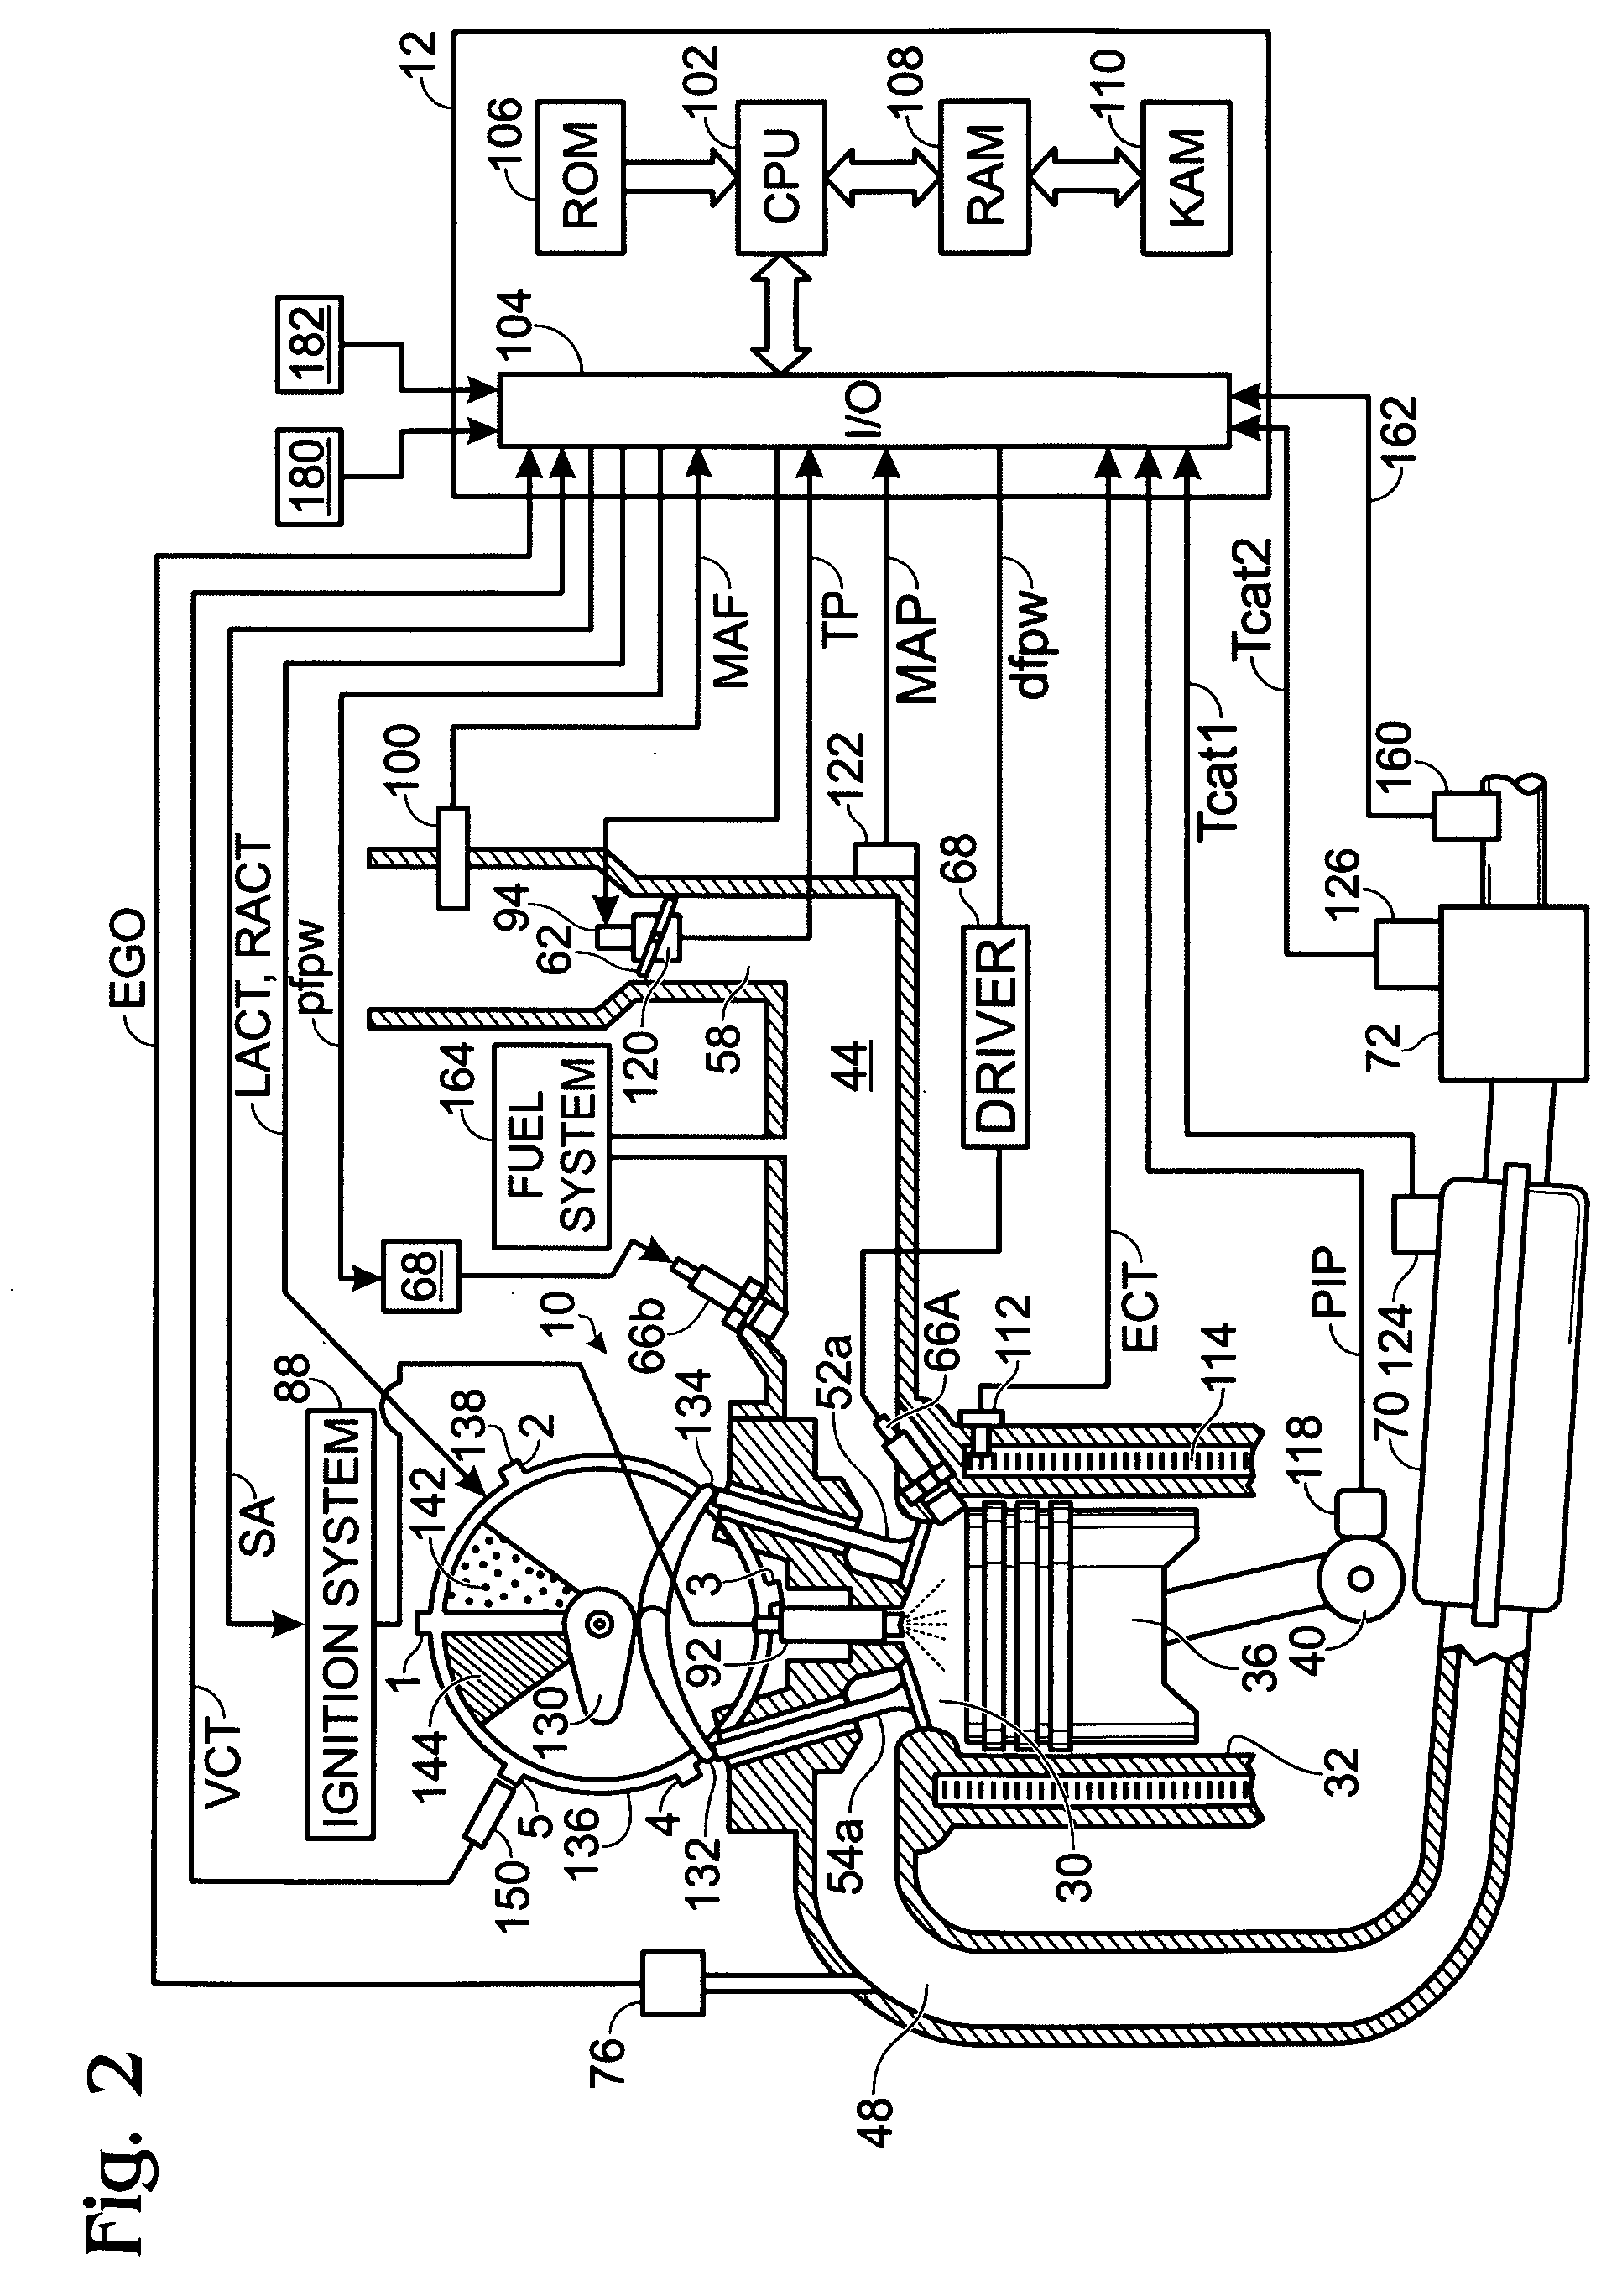 Method for controlling injection timing of an internal combustion engine